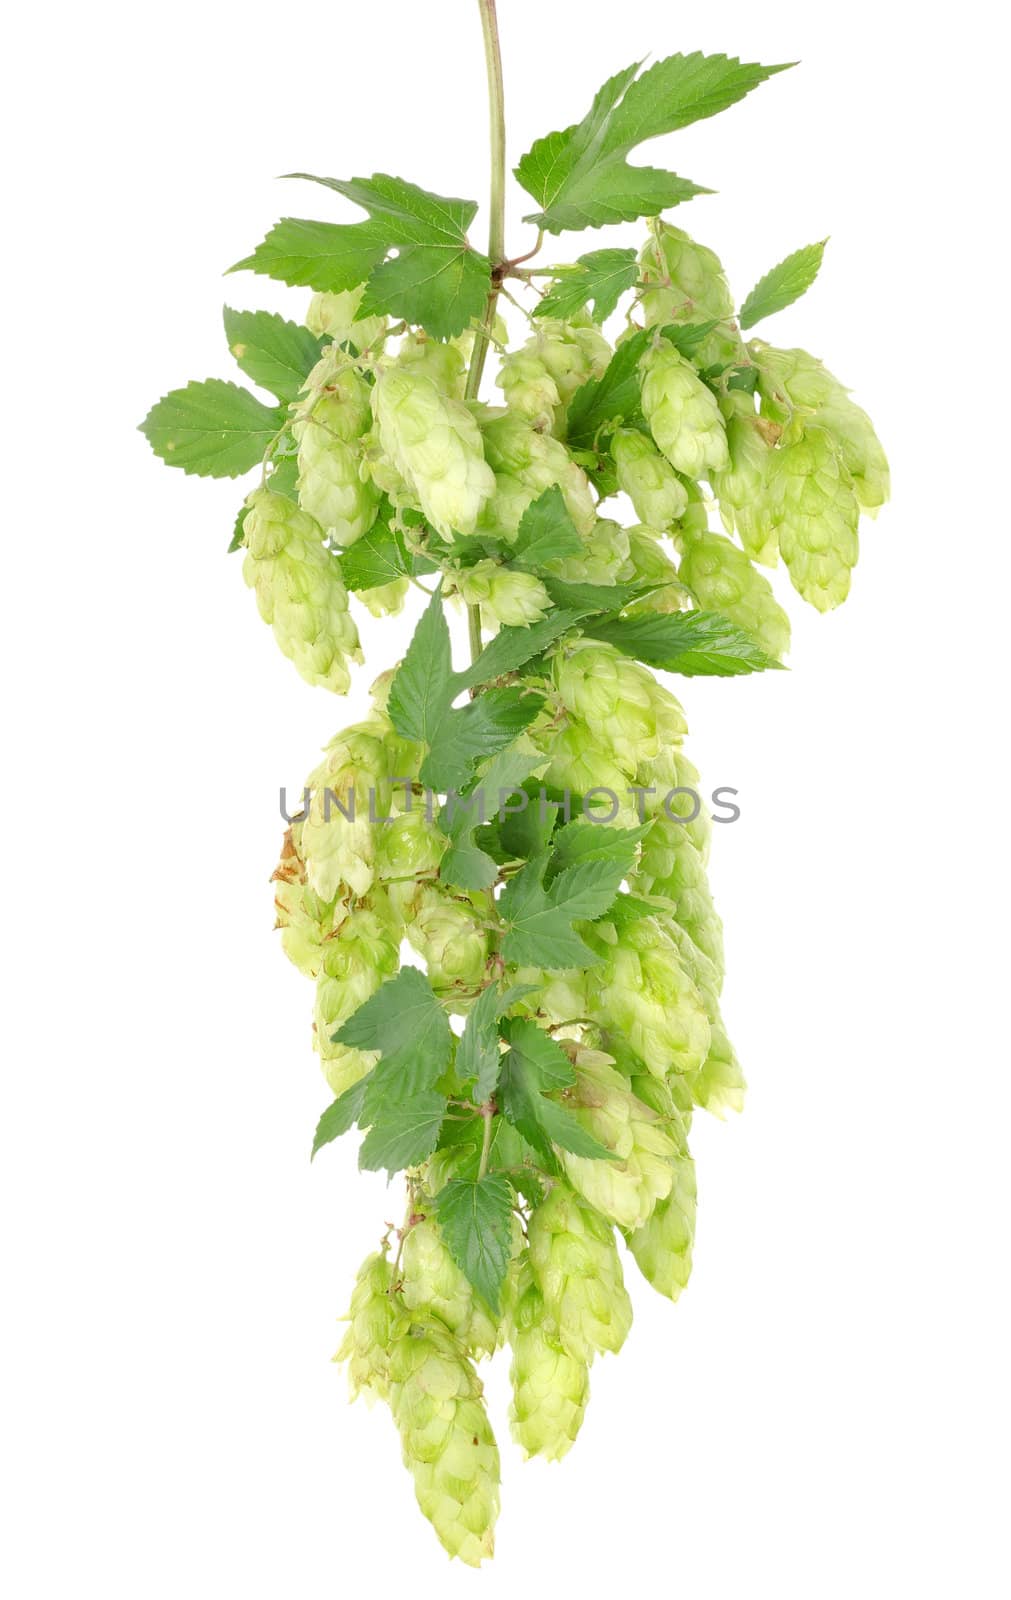 Cluster of hops with leafs isolated on white background